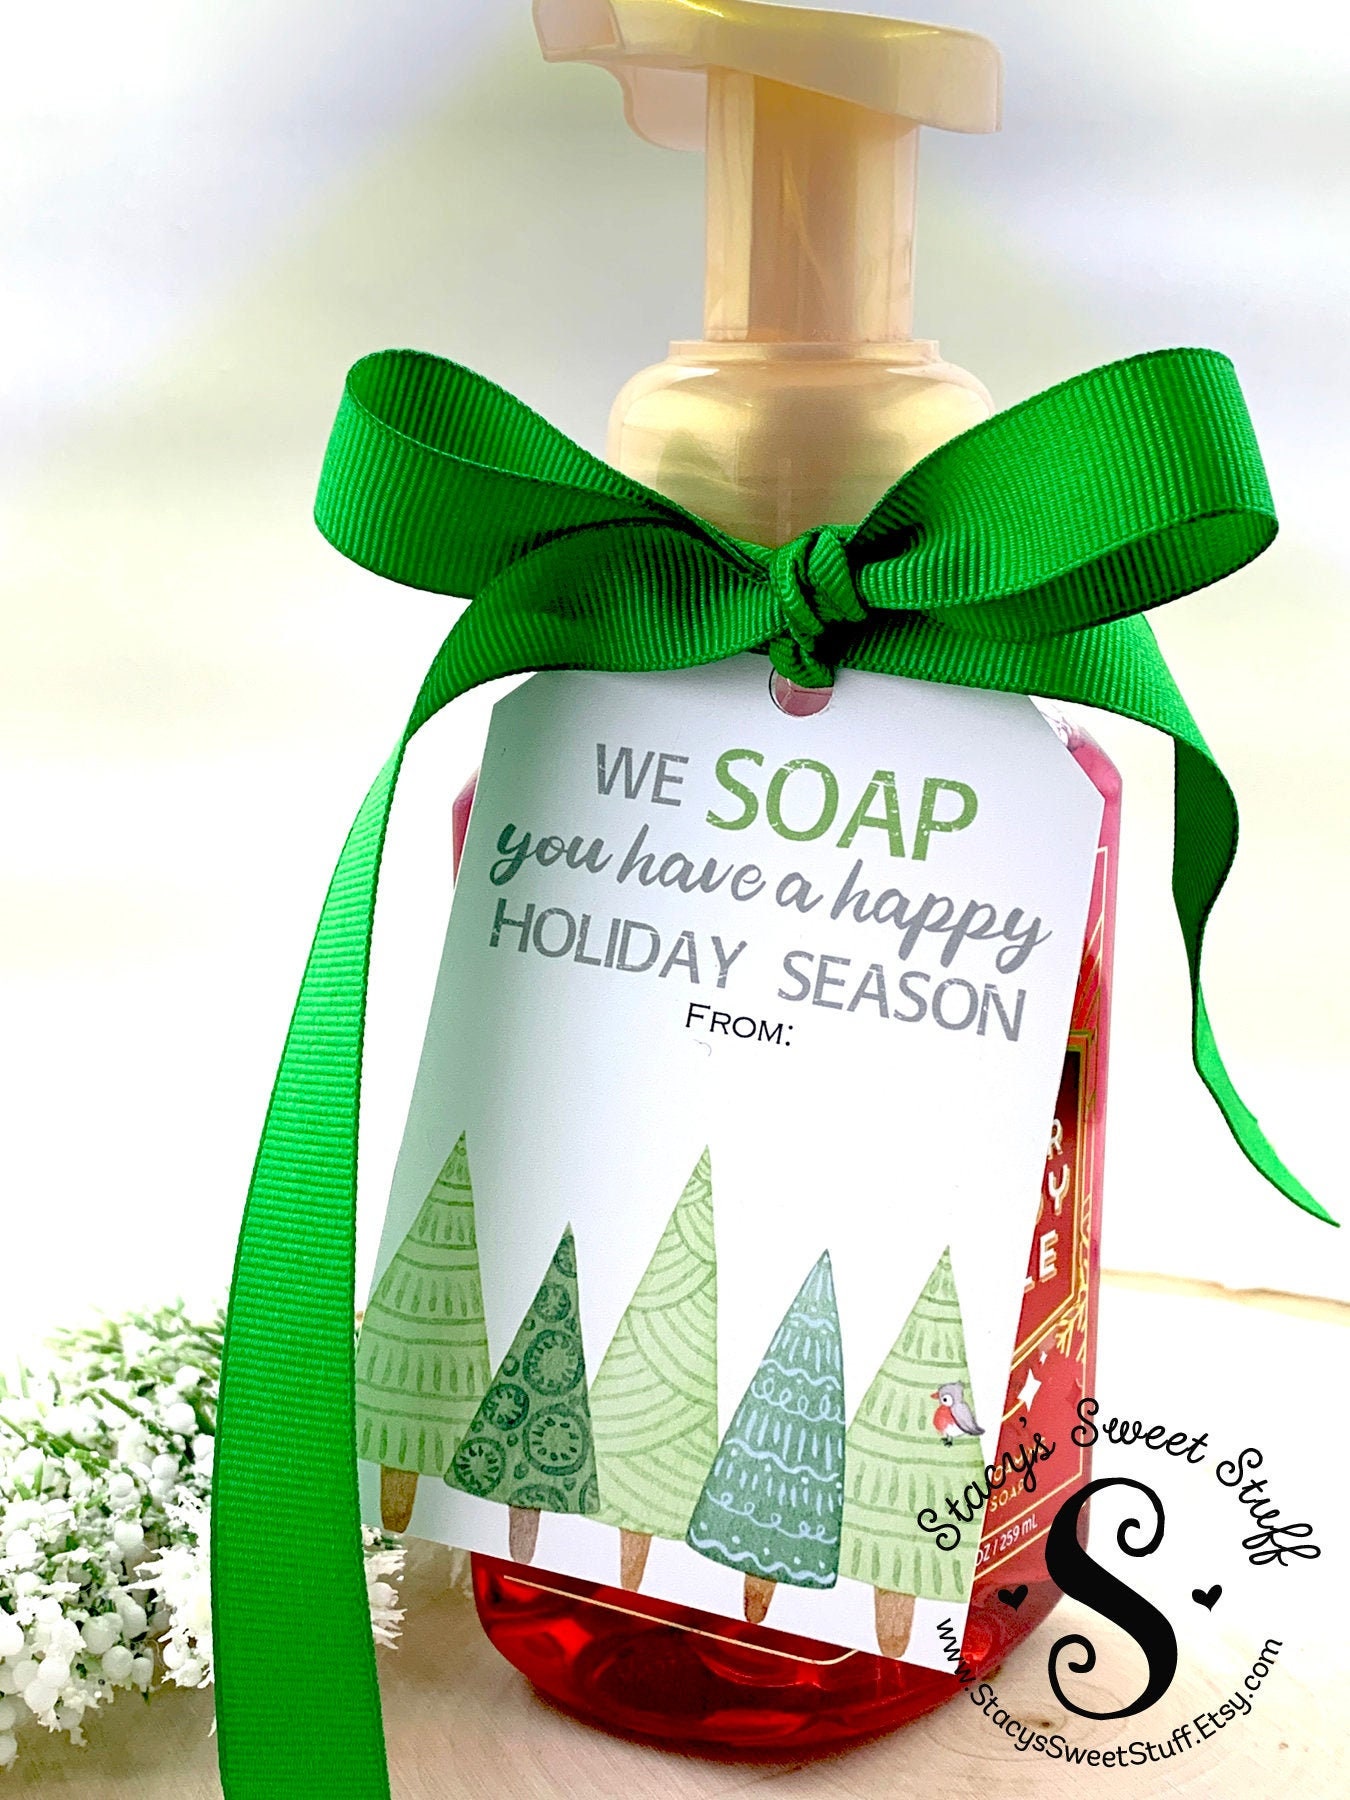 Pack of 10-15-25-35-50-100 Personalized Christmas Handmade Soap Gift  Decorations, Vegan Scented Soap Christmas Gifts, Happy Holidays Gifts  (Christmas